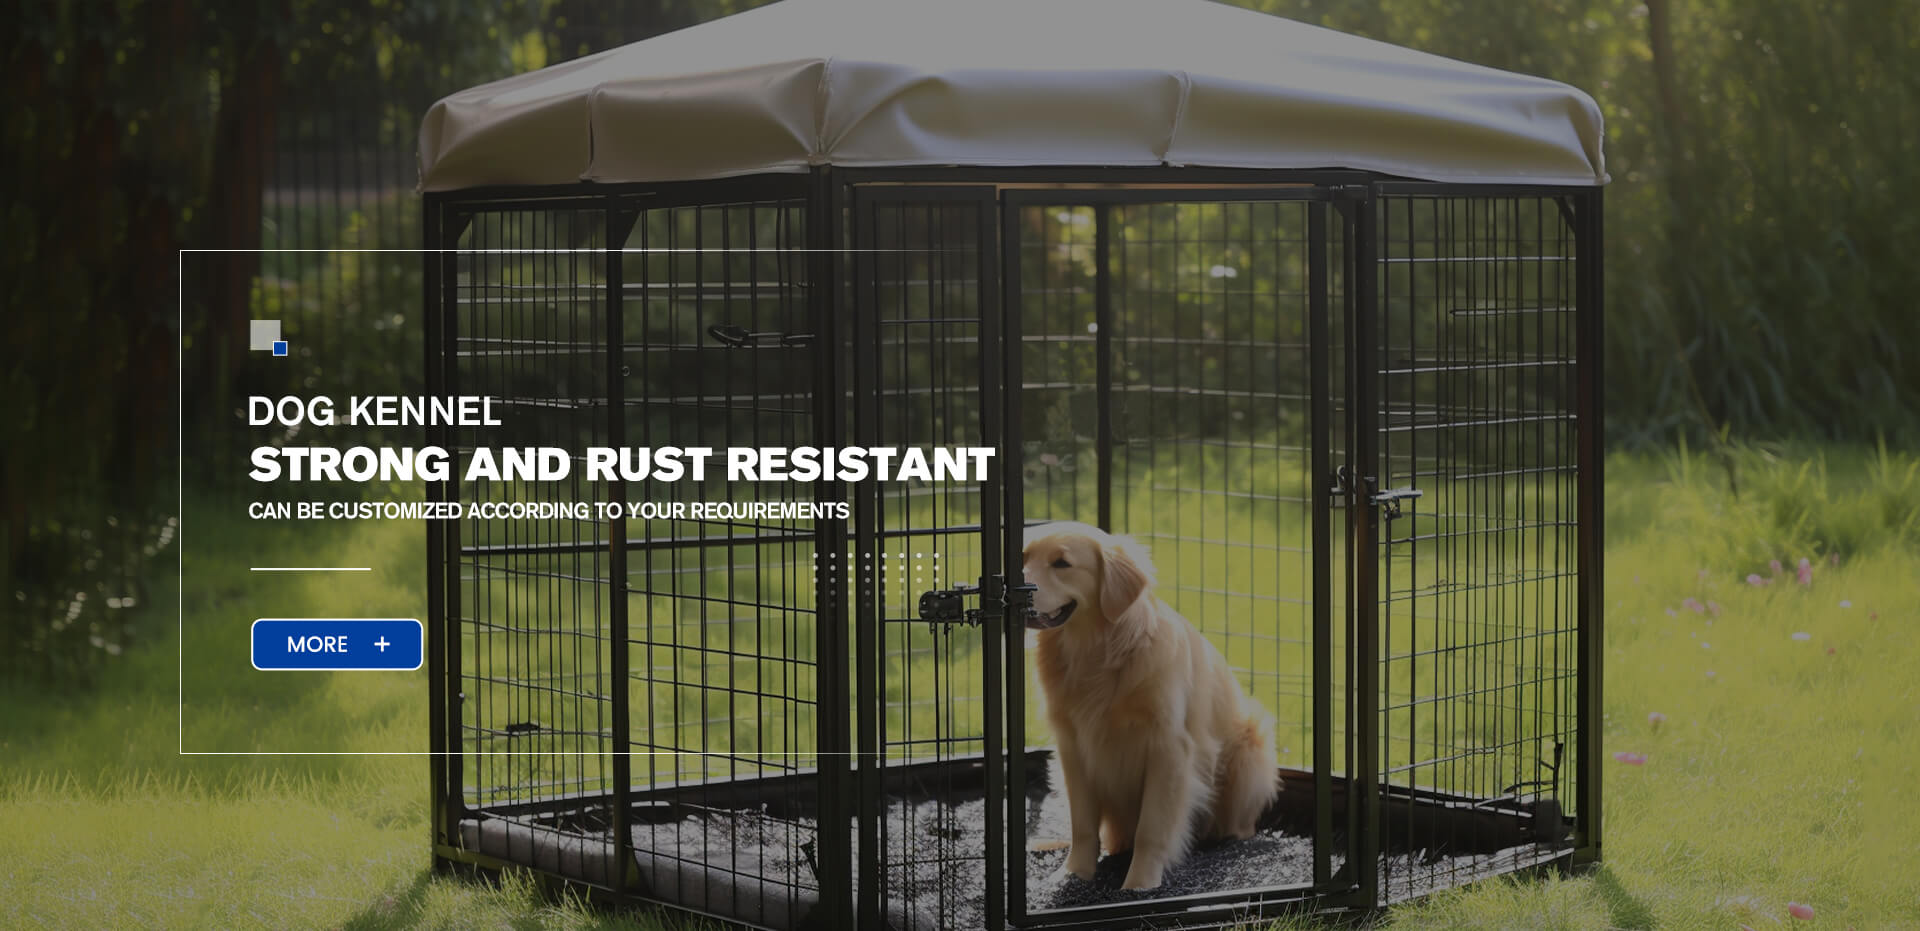 DOG KENNEL STRONG AND RUST RESISTANT